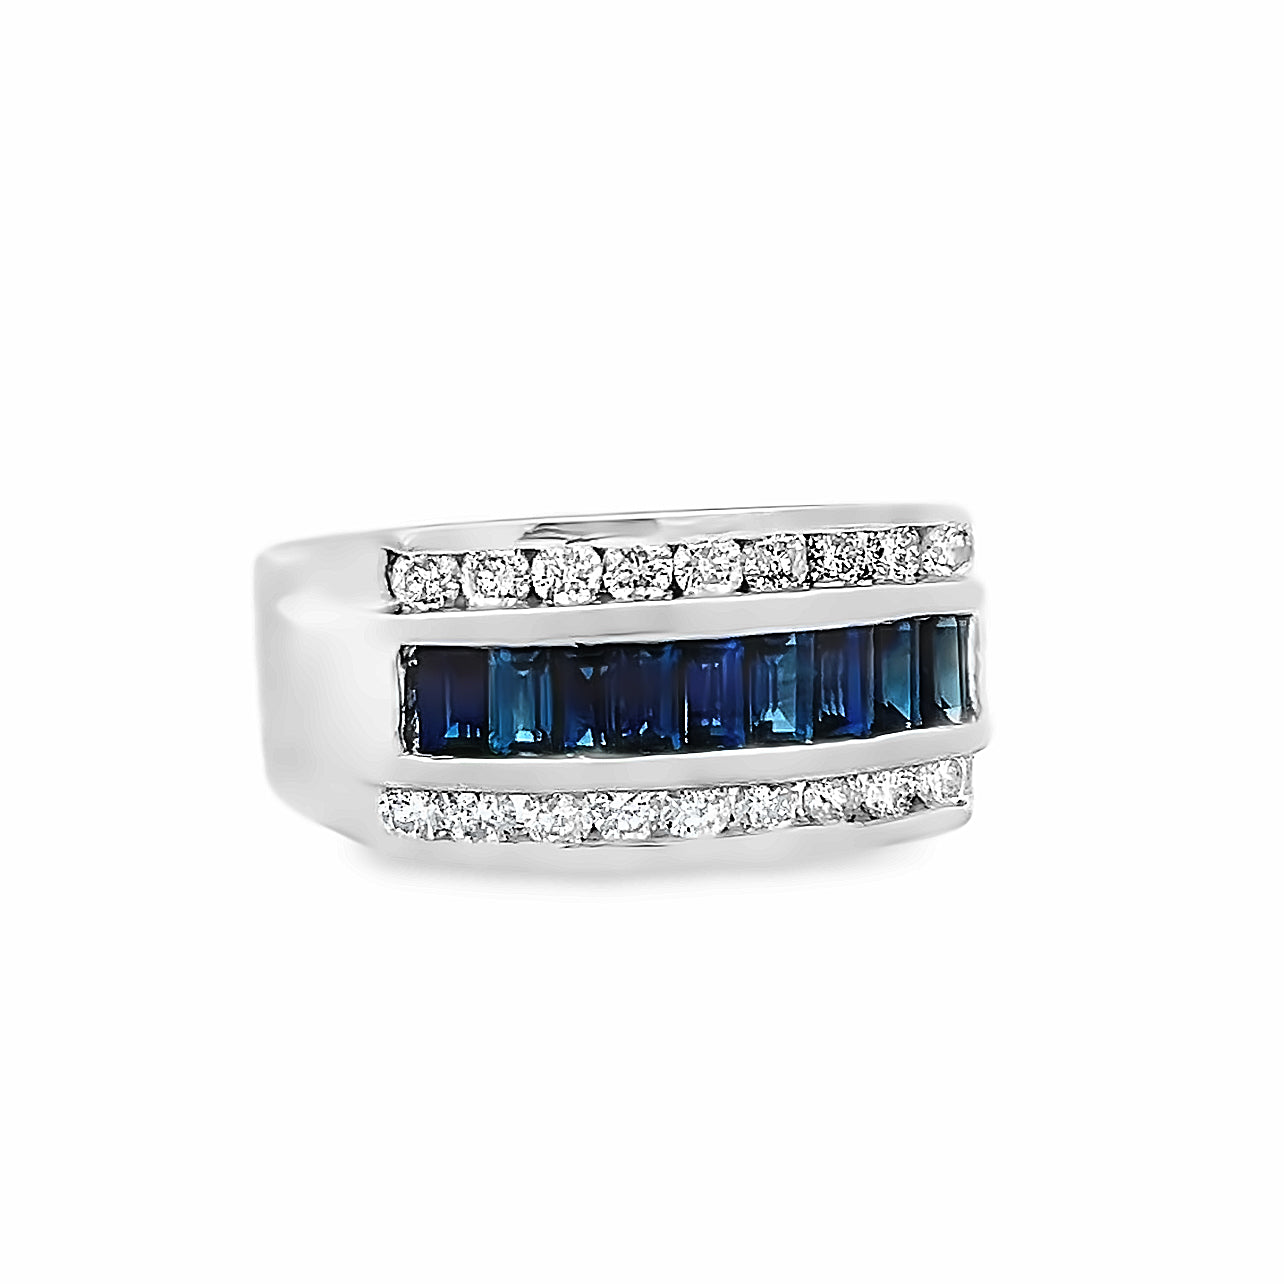 14k White Gold Men's Baguette Cut Sapphire and Round Diamond Channel Set Ring (1.0ctw.)